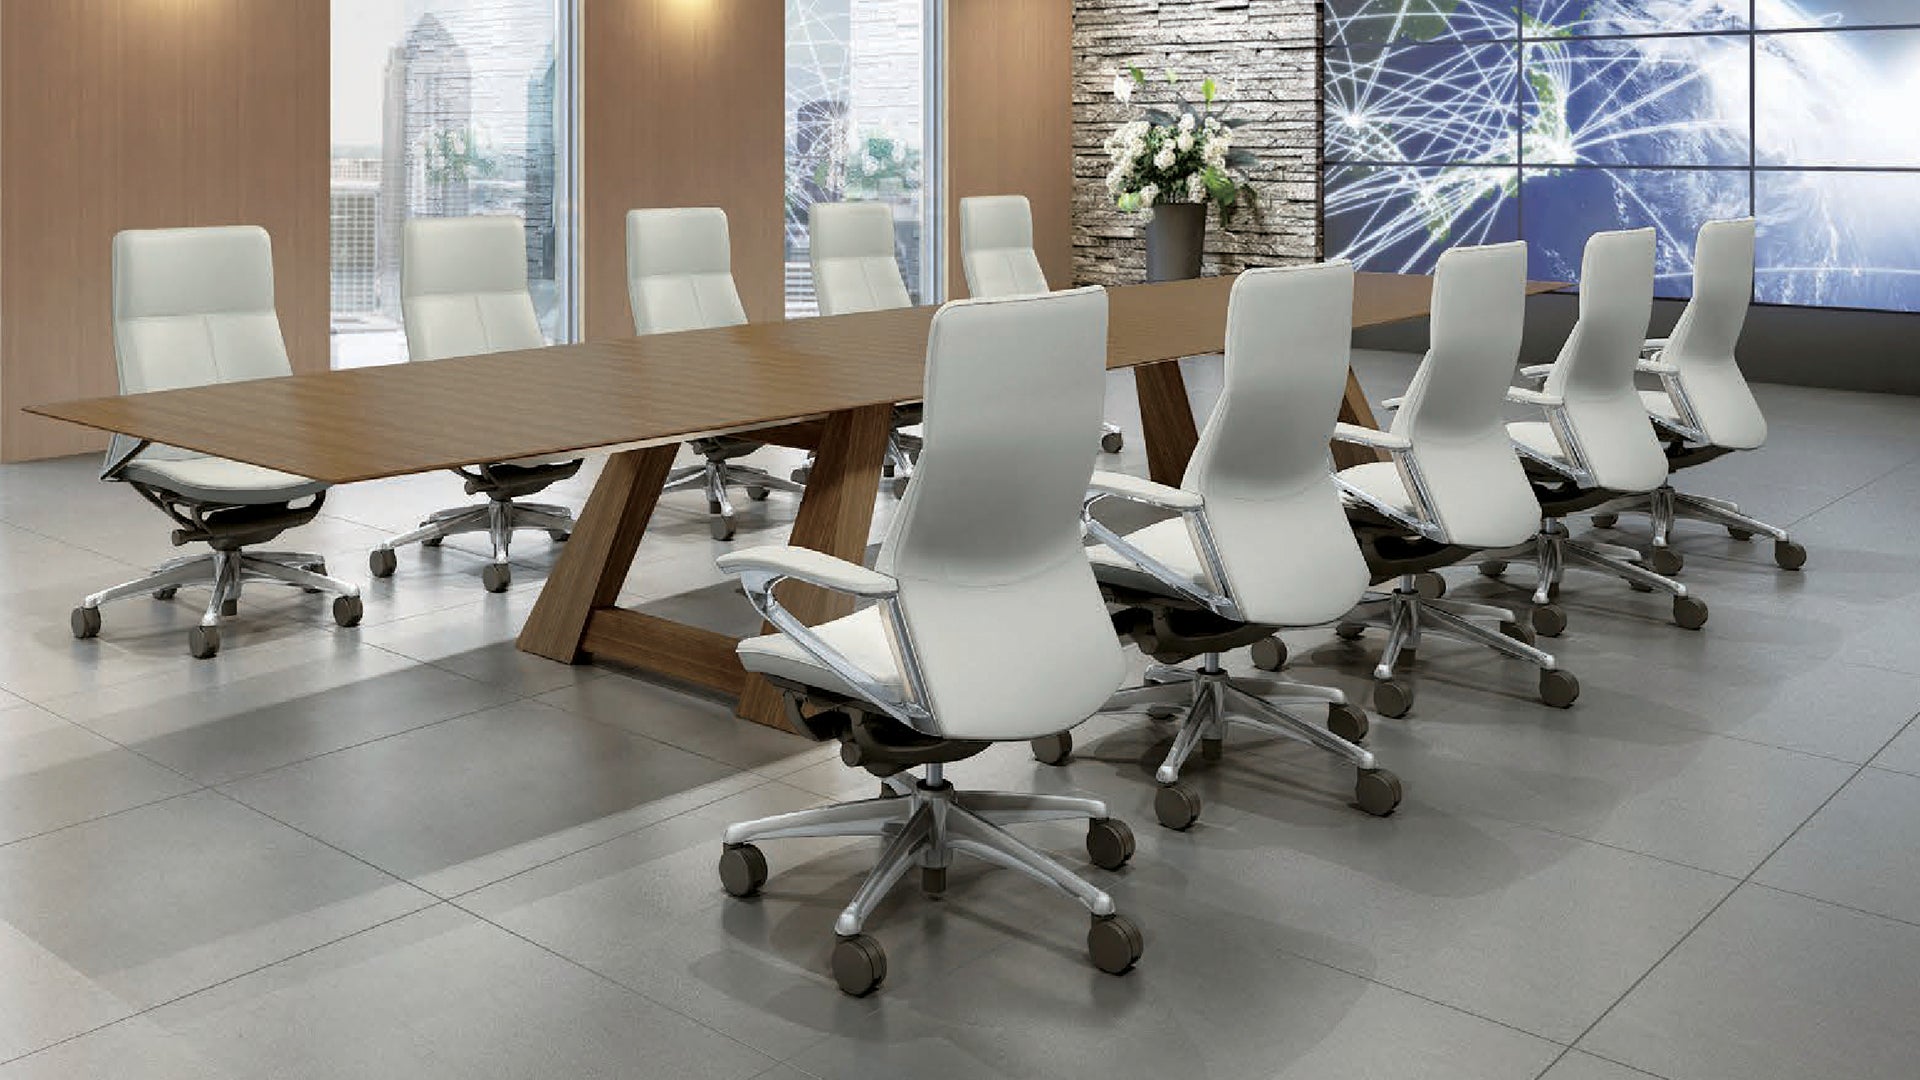 Four Type of Chairs That Create Appealing Workplace Environments